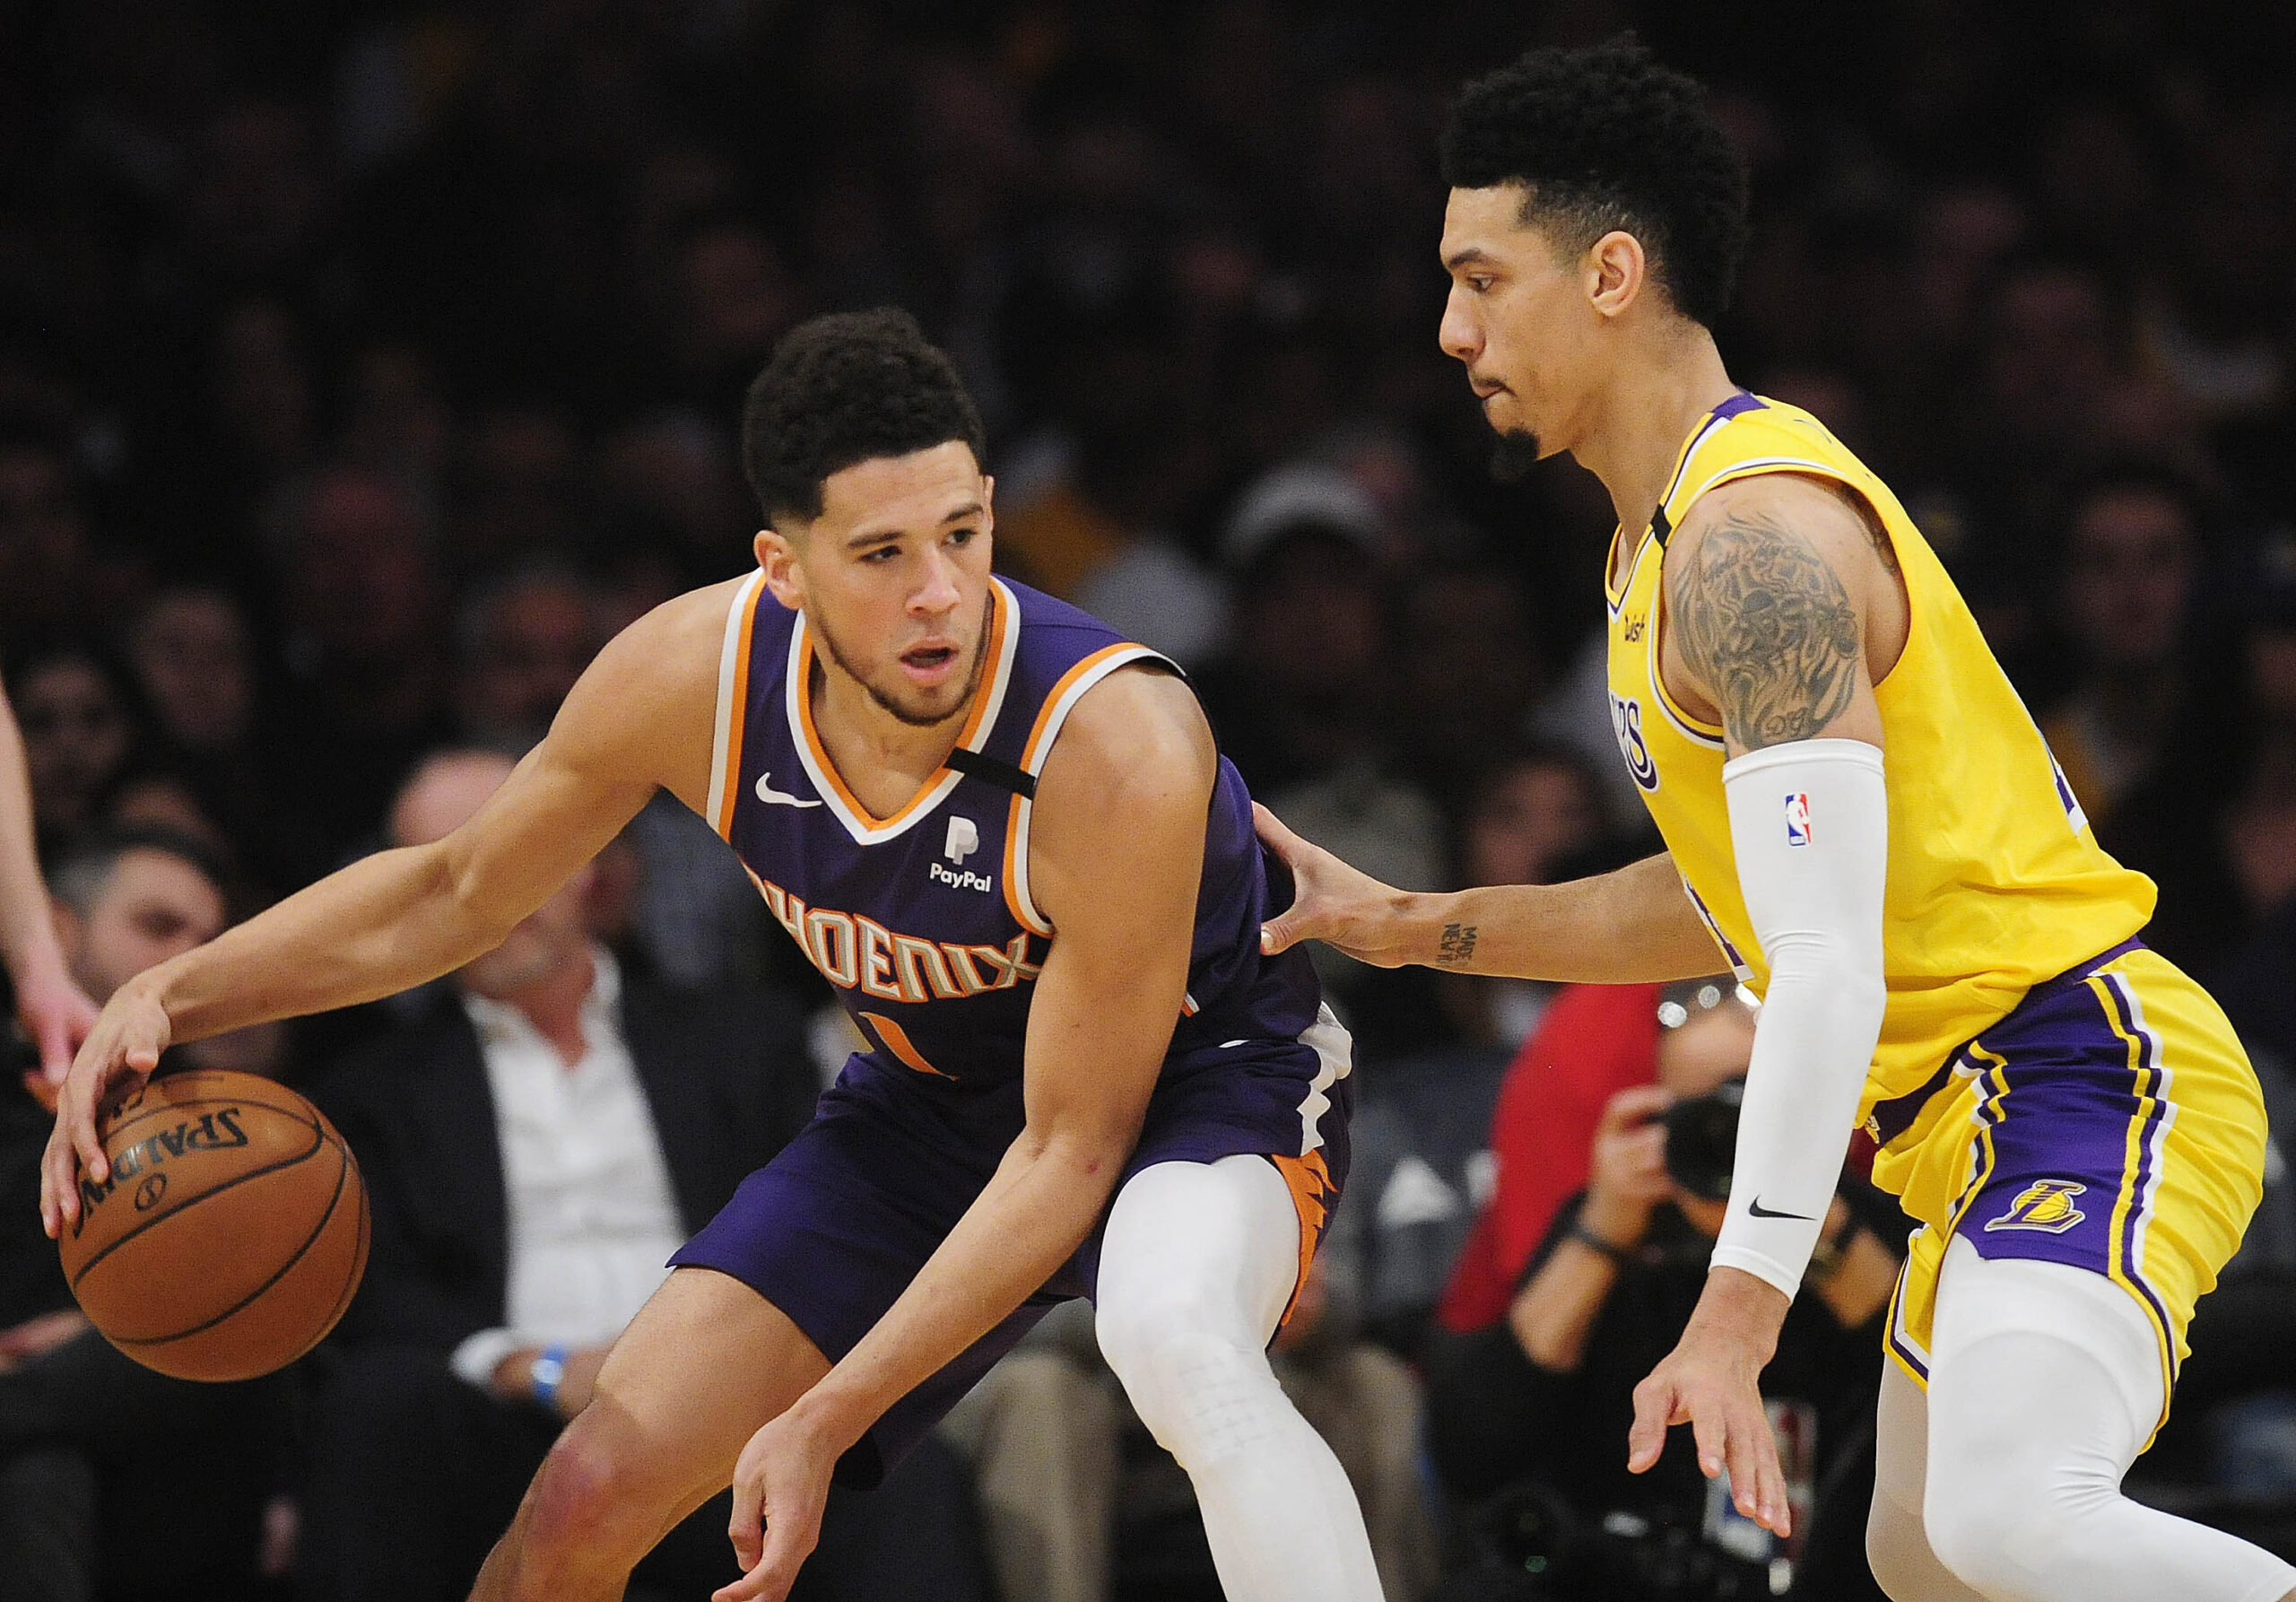 Devin Booker replacing Damian Lillard in All-Star game, 3-point